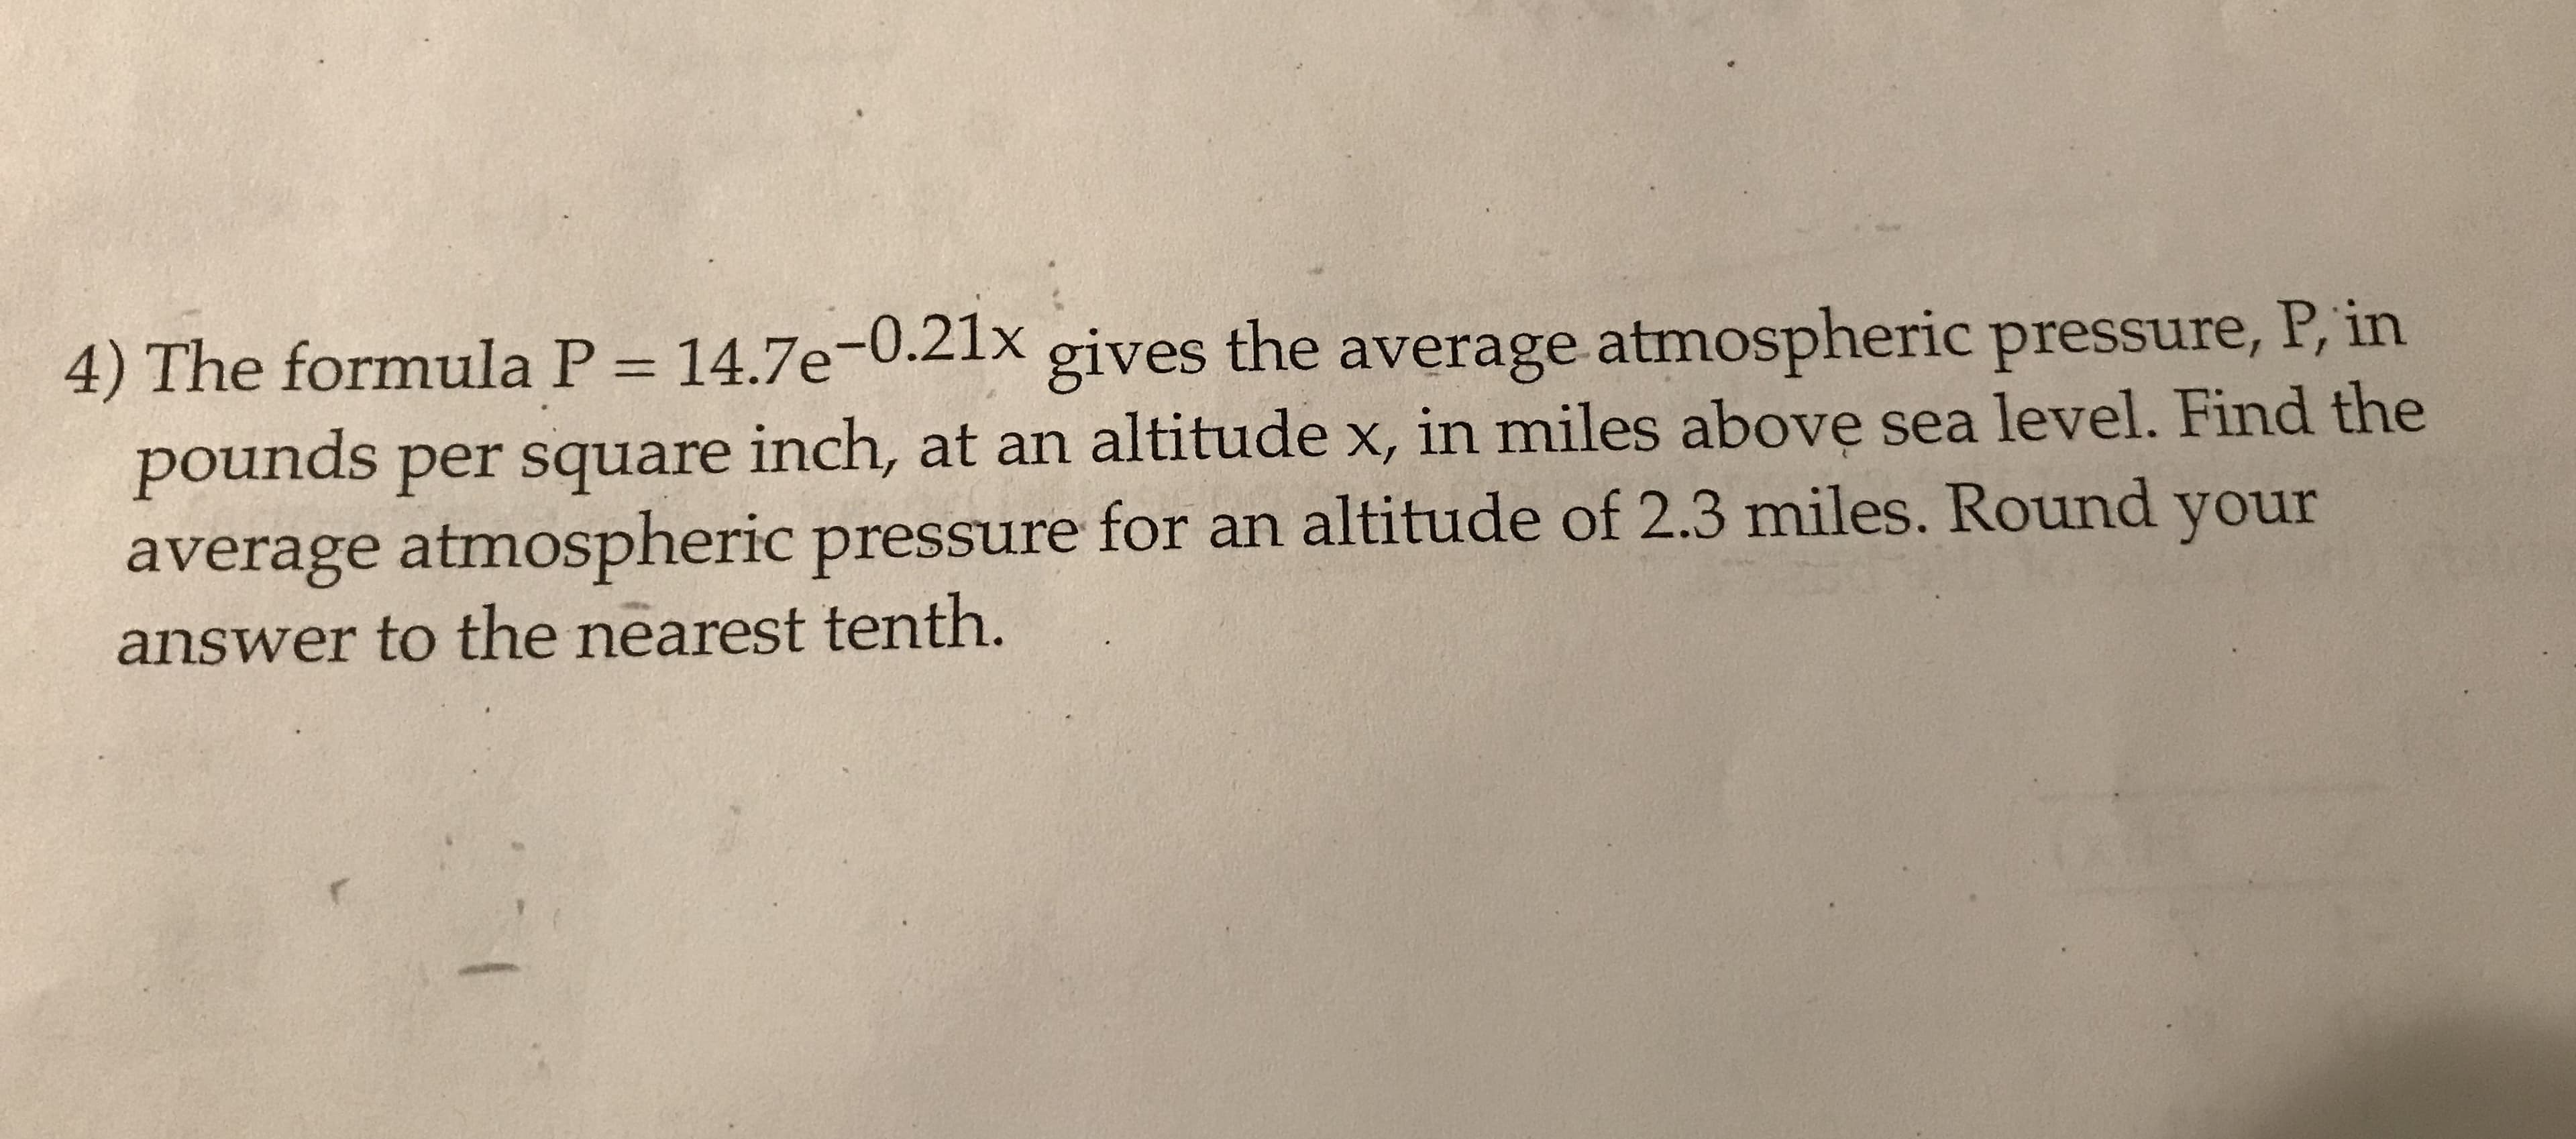 14.7e-0.21x
4) The formula P
the average atmospheric pressure, P, in
gives
pounds per square inch, at an altitude x, in miles above sea level. Find the
average atmospheric pressure for an altitude of 2.3 miles. Round your
answer to the nearest tenth.
